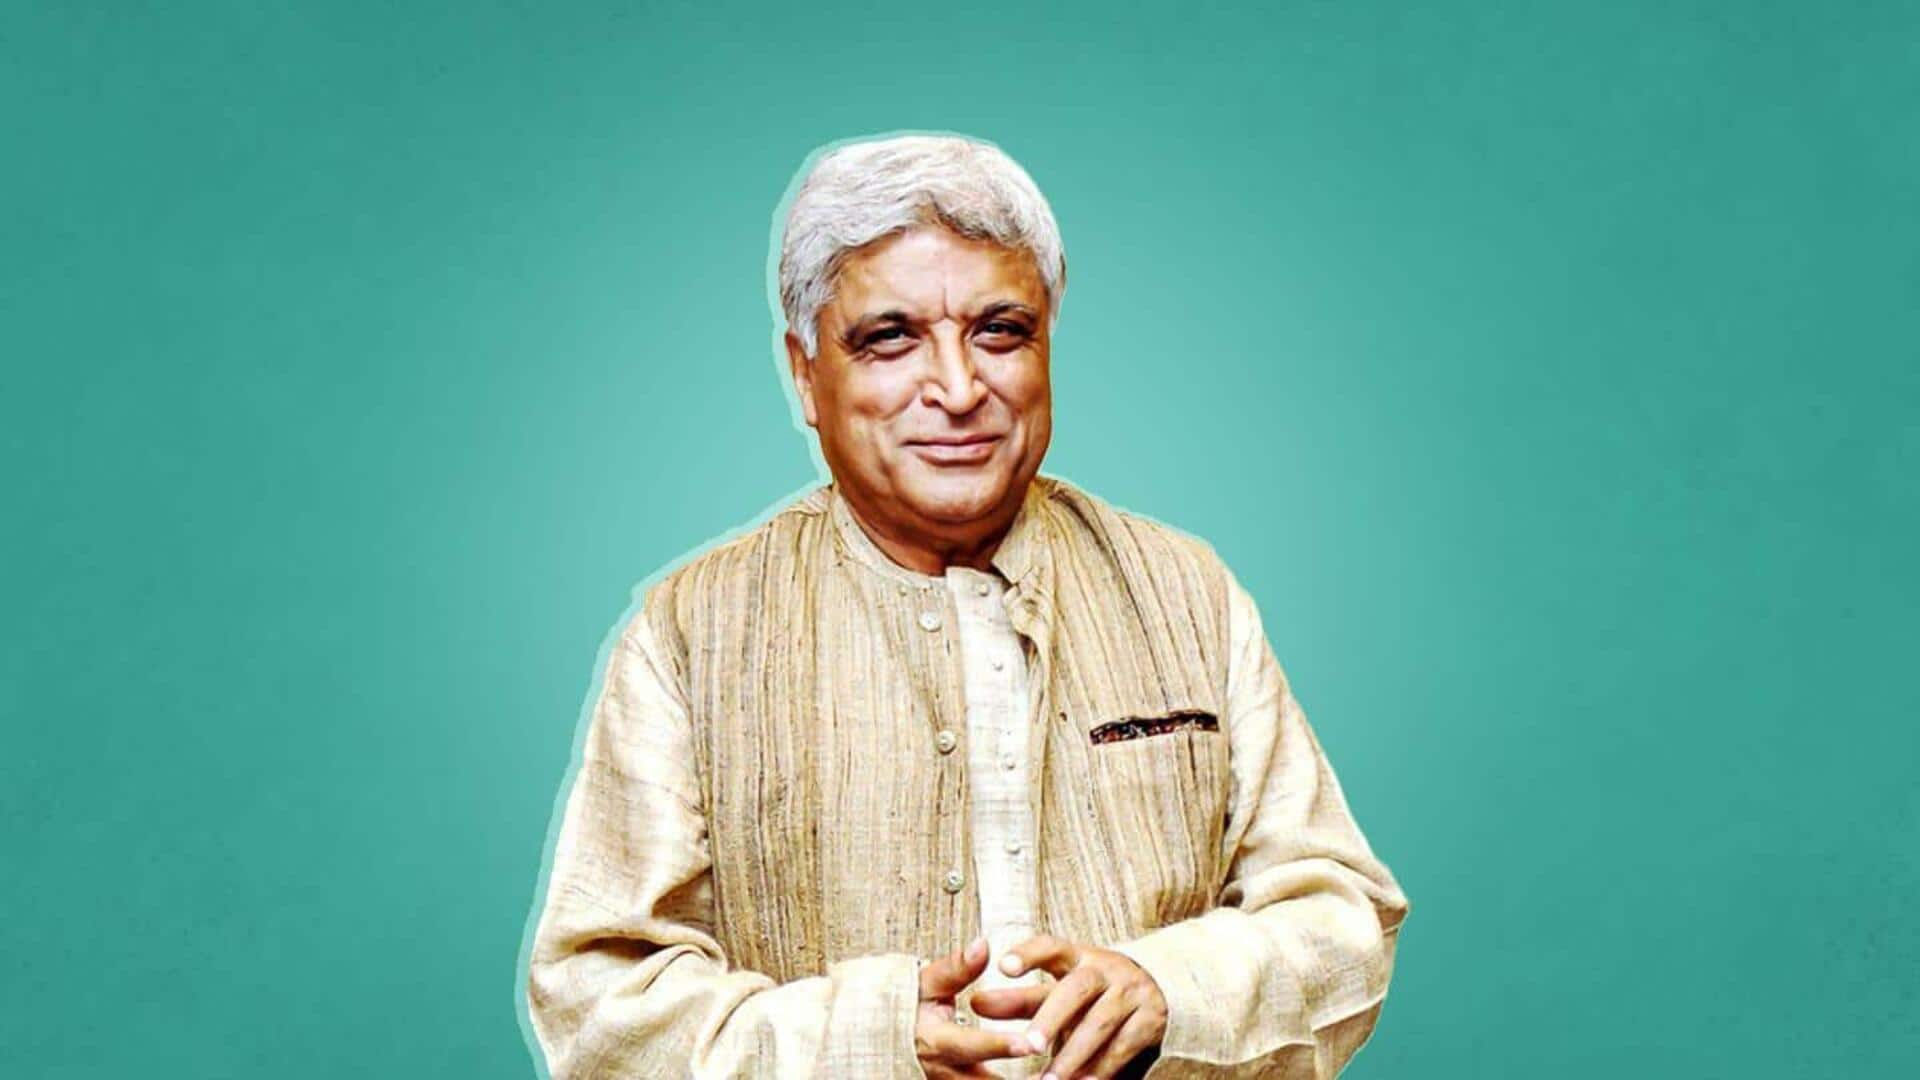 Javed Akhtar's birthday: Lesser-known tidbits about the ace lyricist, writer